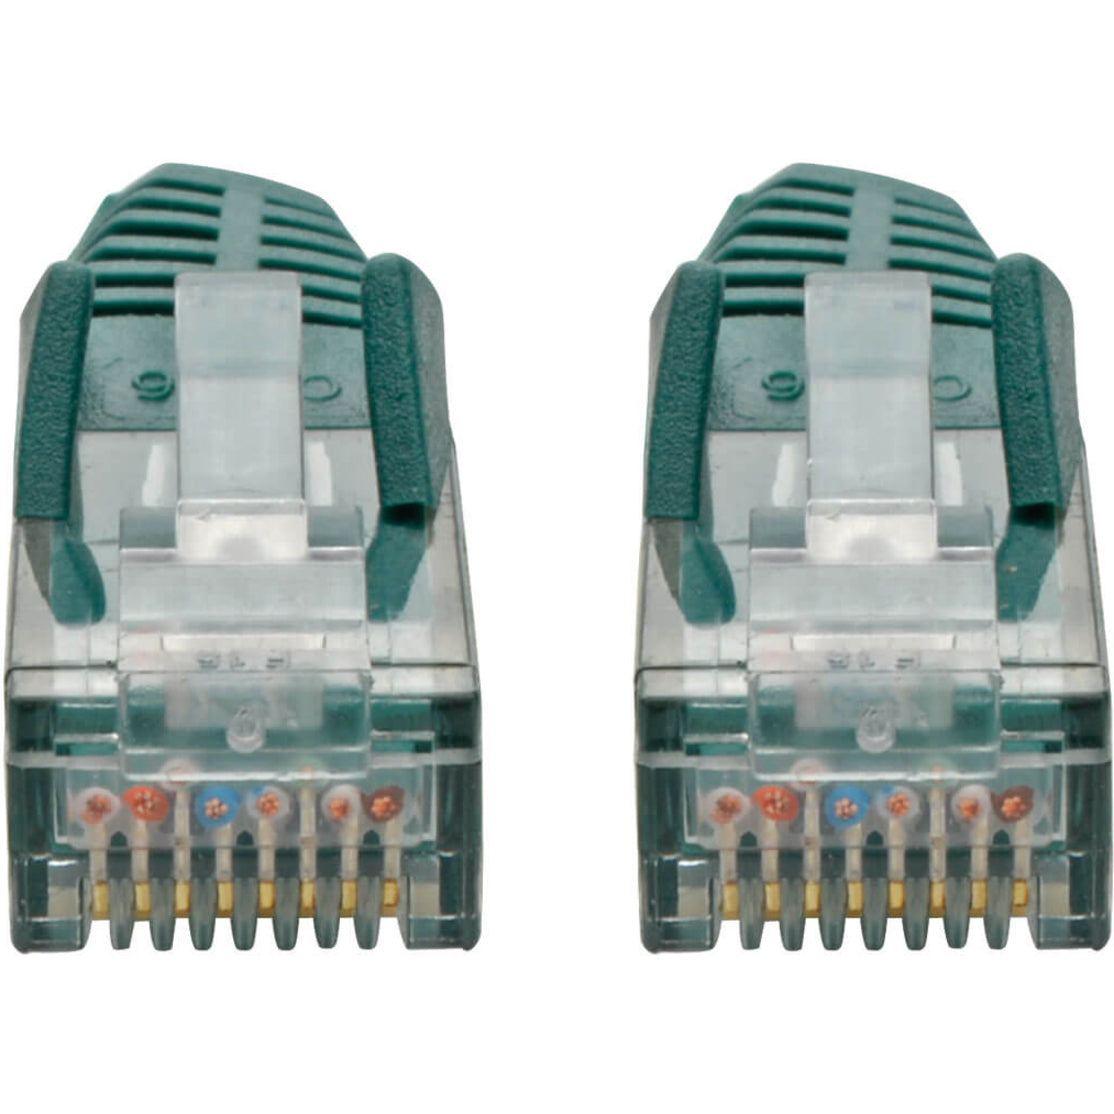 Tripp Lite N201-035-GN Cat.6 UTP Patch Network Cable, 35ft Green, 1 Gbit/s Data Transfer Rate